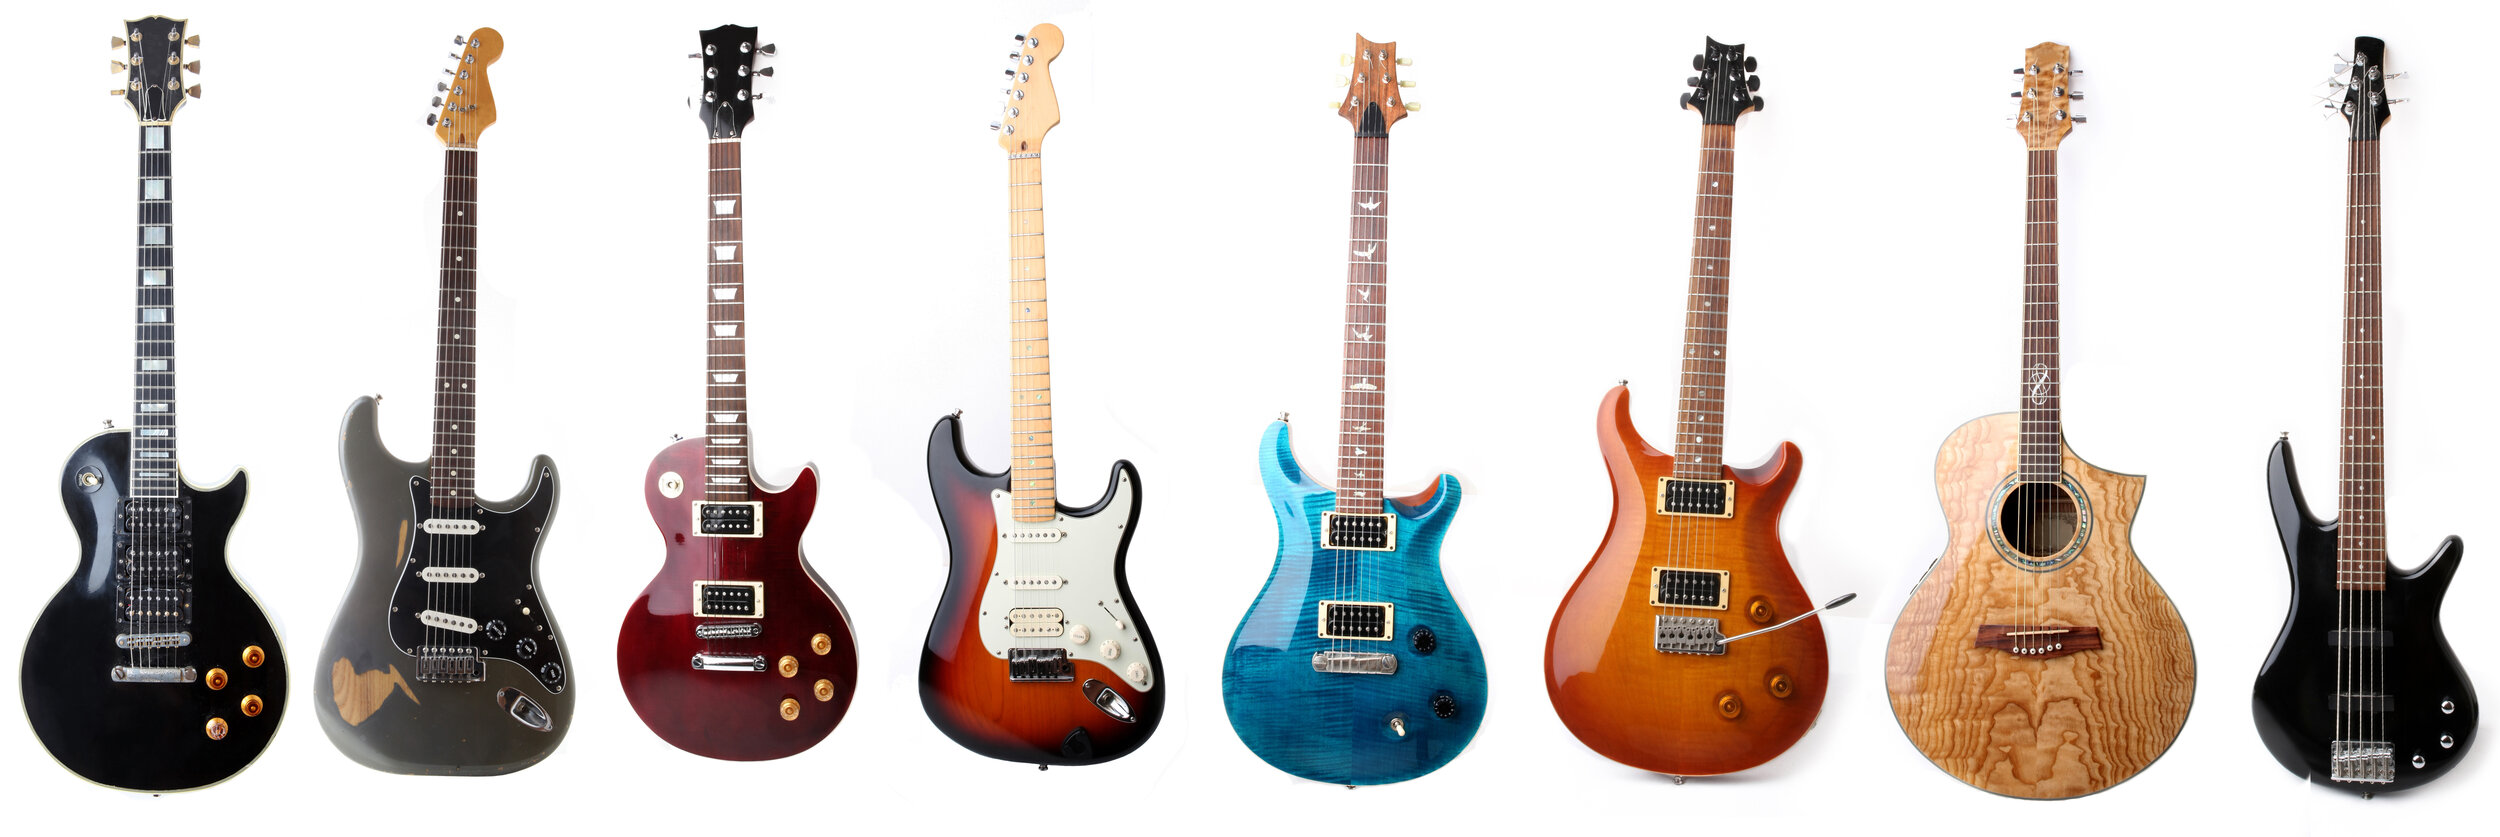 Does body wood matter in a solid body Electric guitar? — That